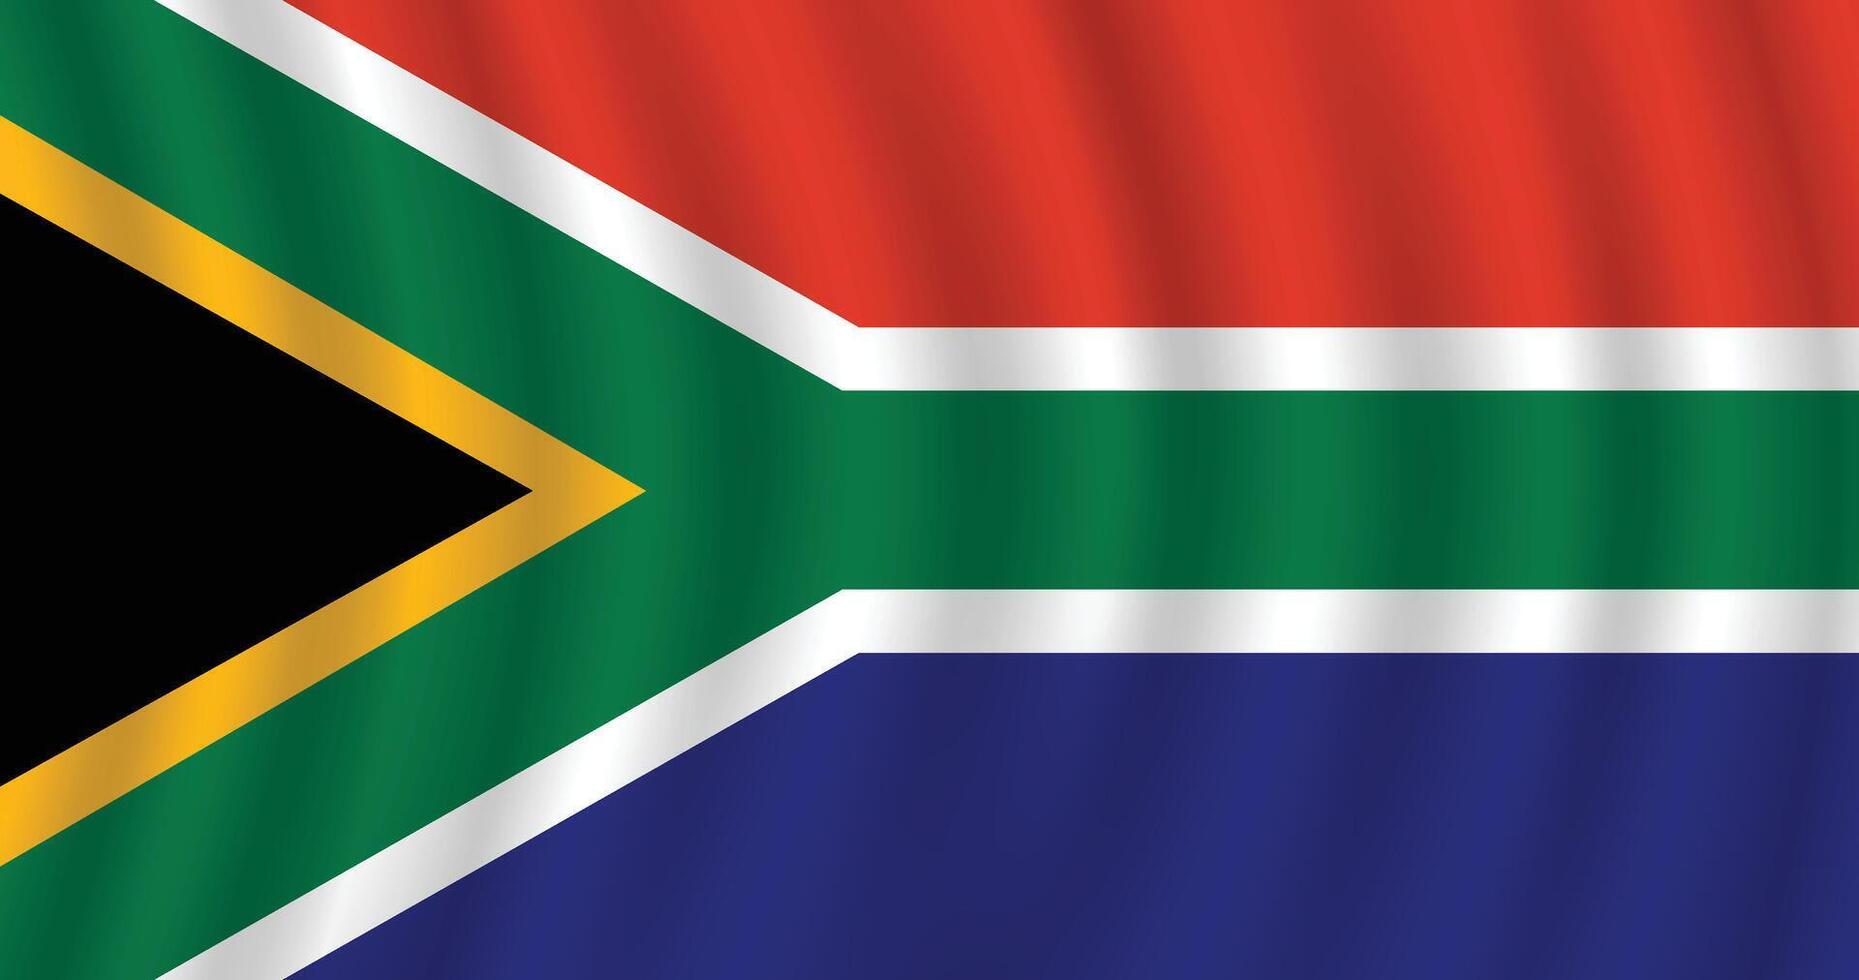 Flat Illustration of the South Africa flag. South Africa national flag design. South Africa Wave flag. vector